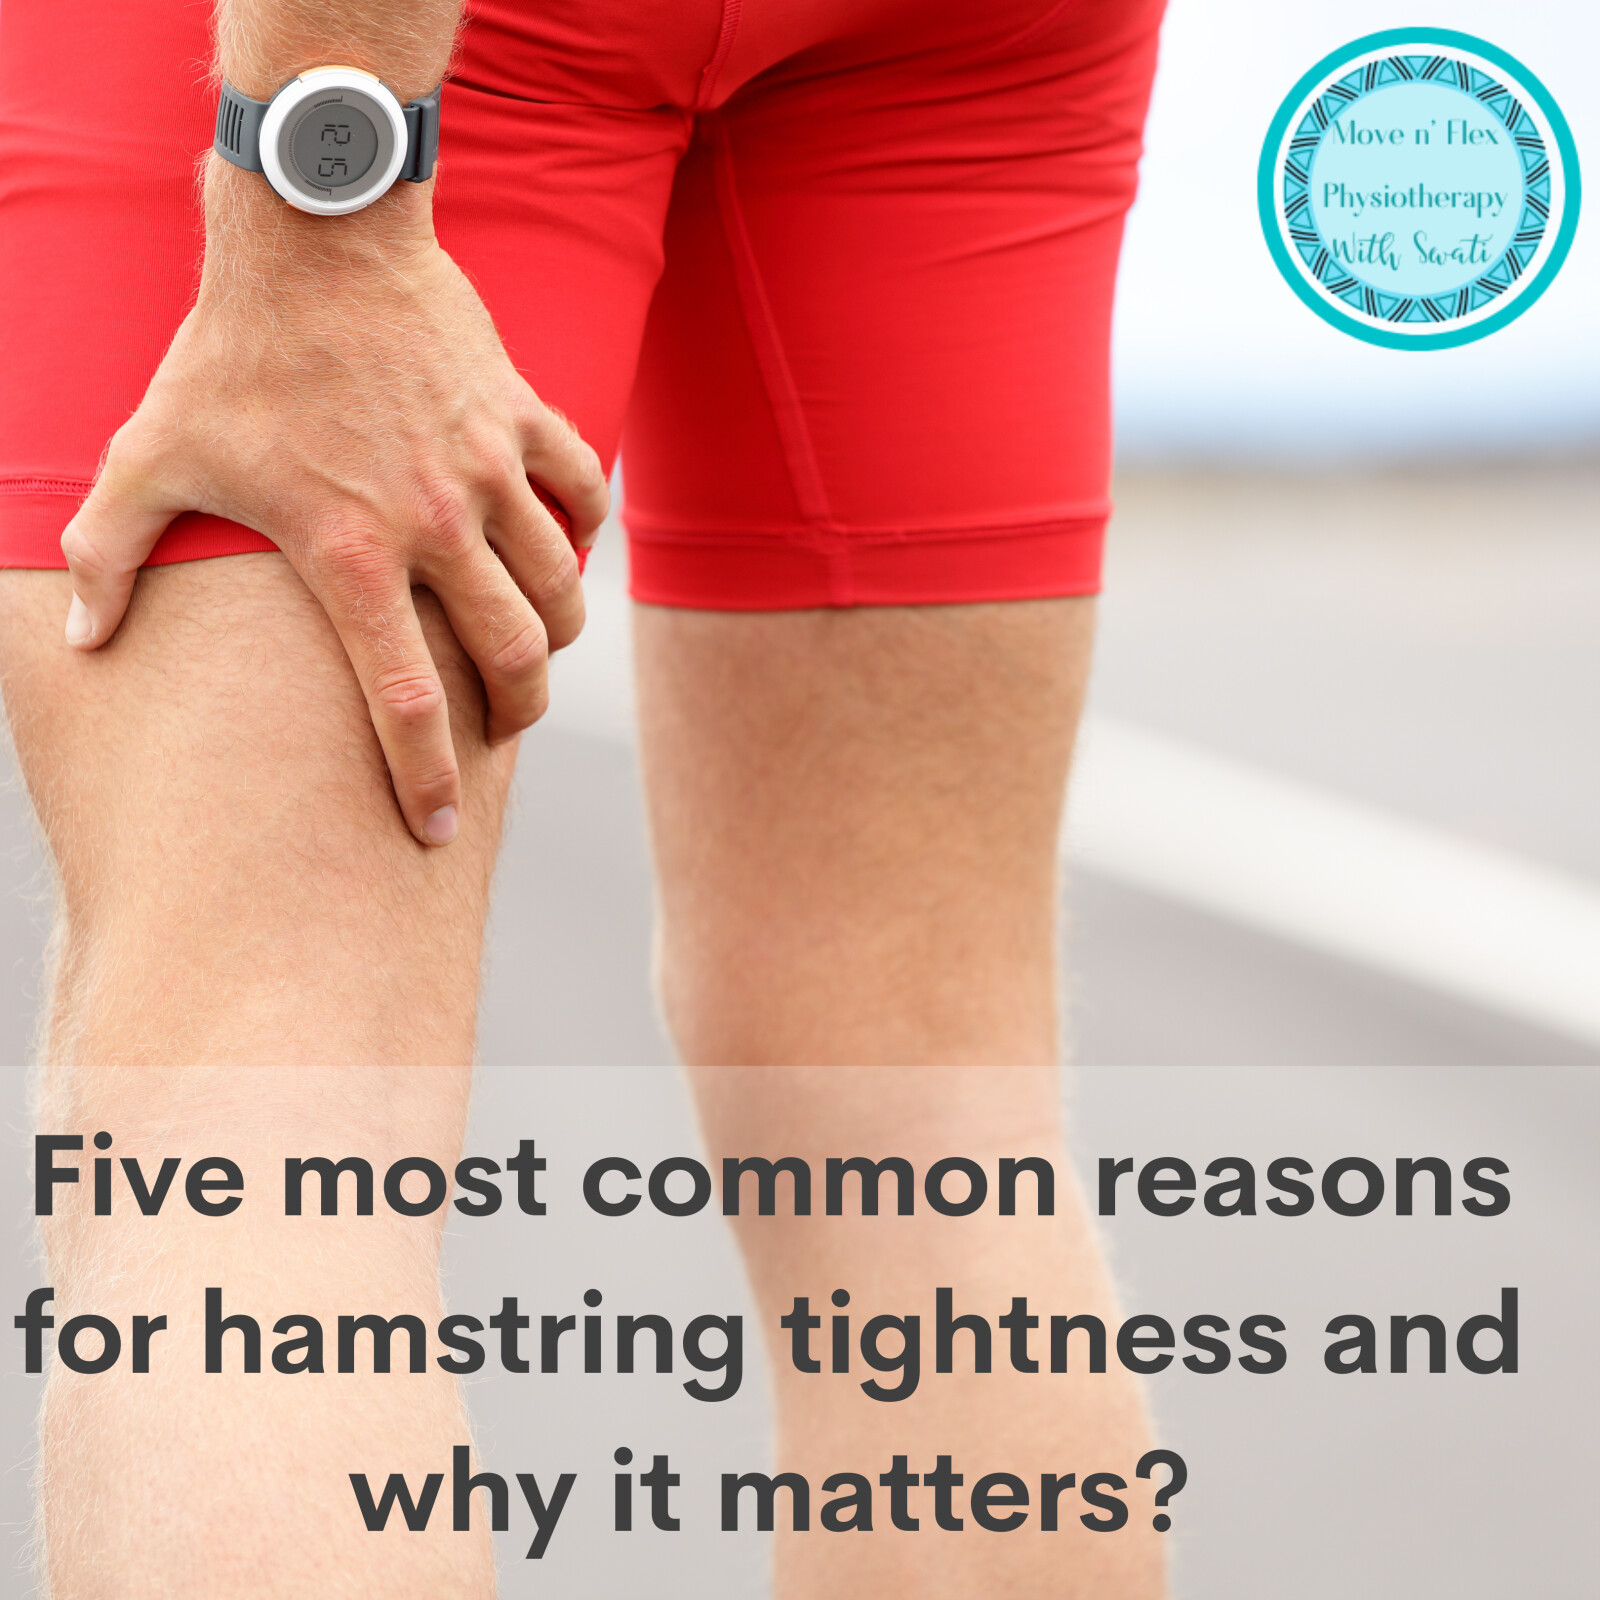 Five most common reasons for hamstring tightness and why it matters?